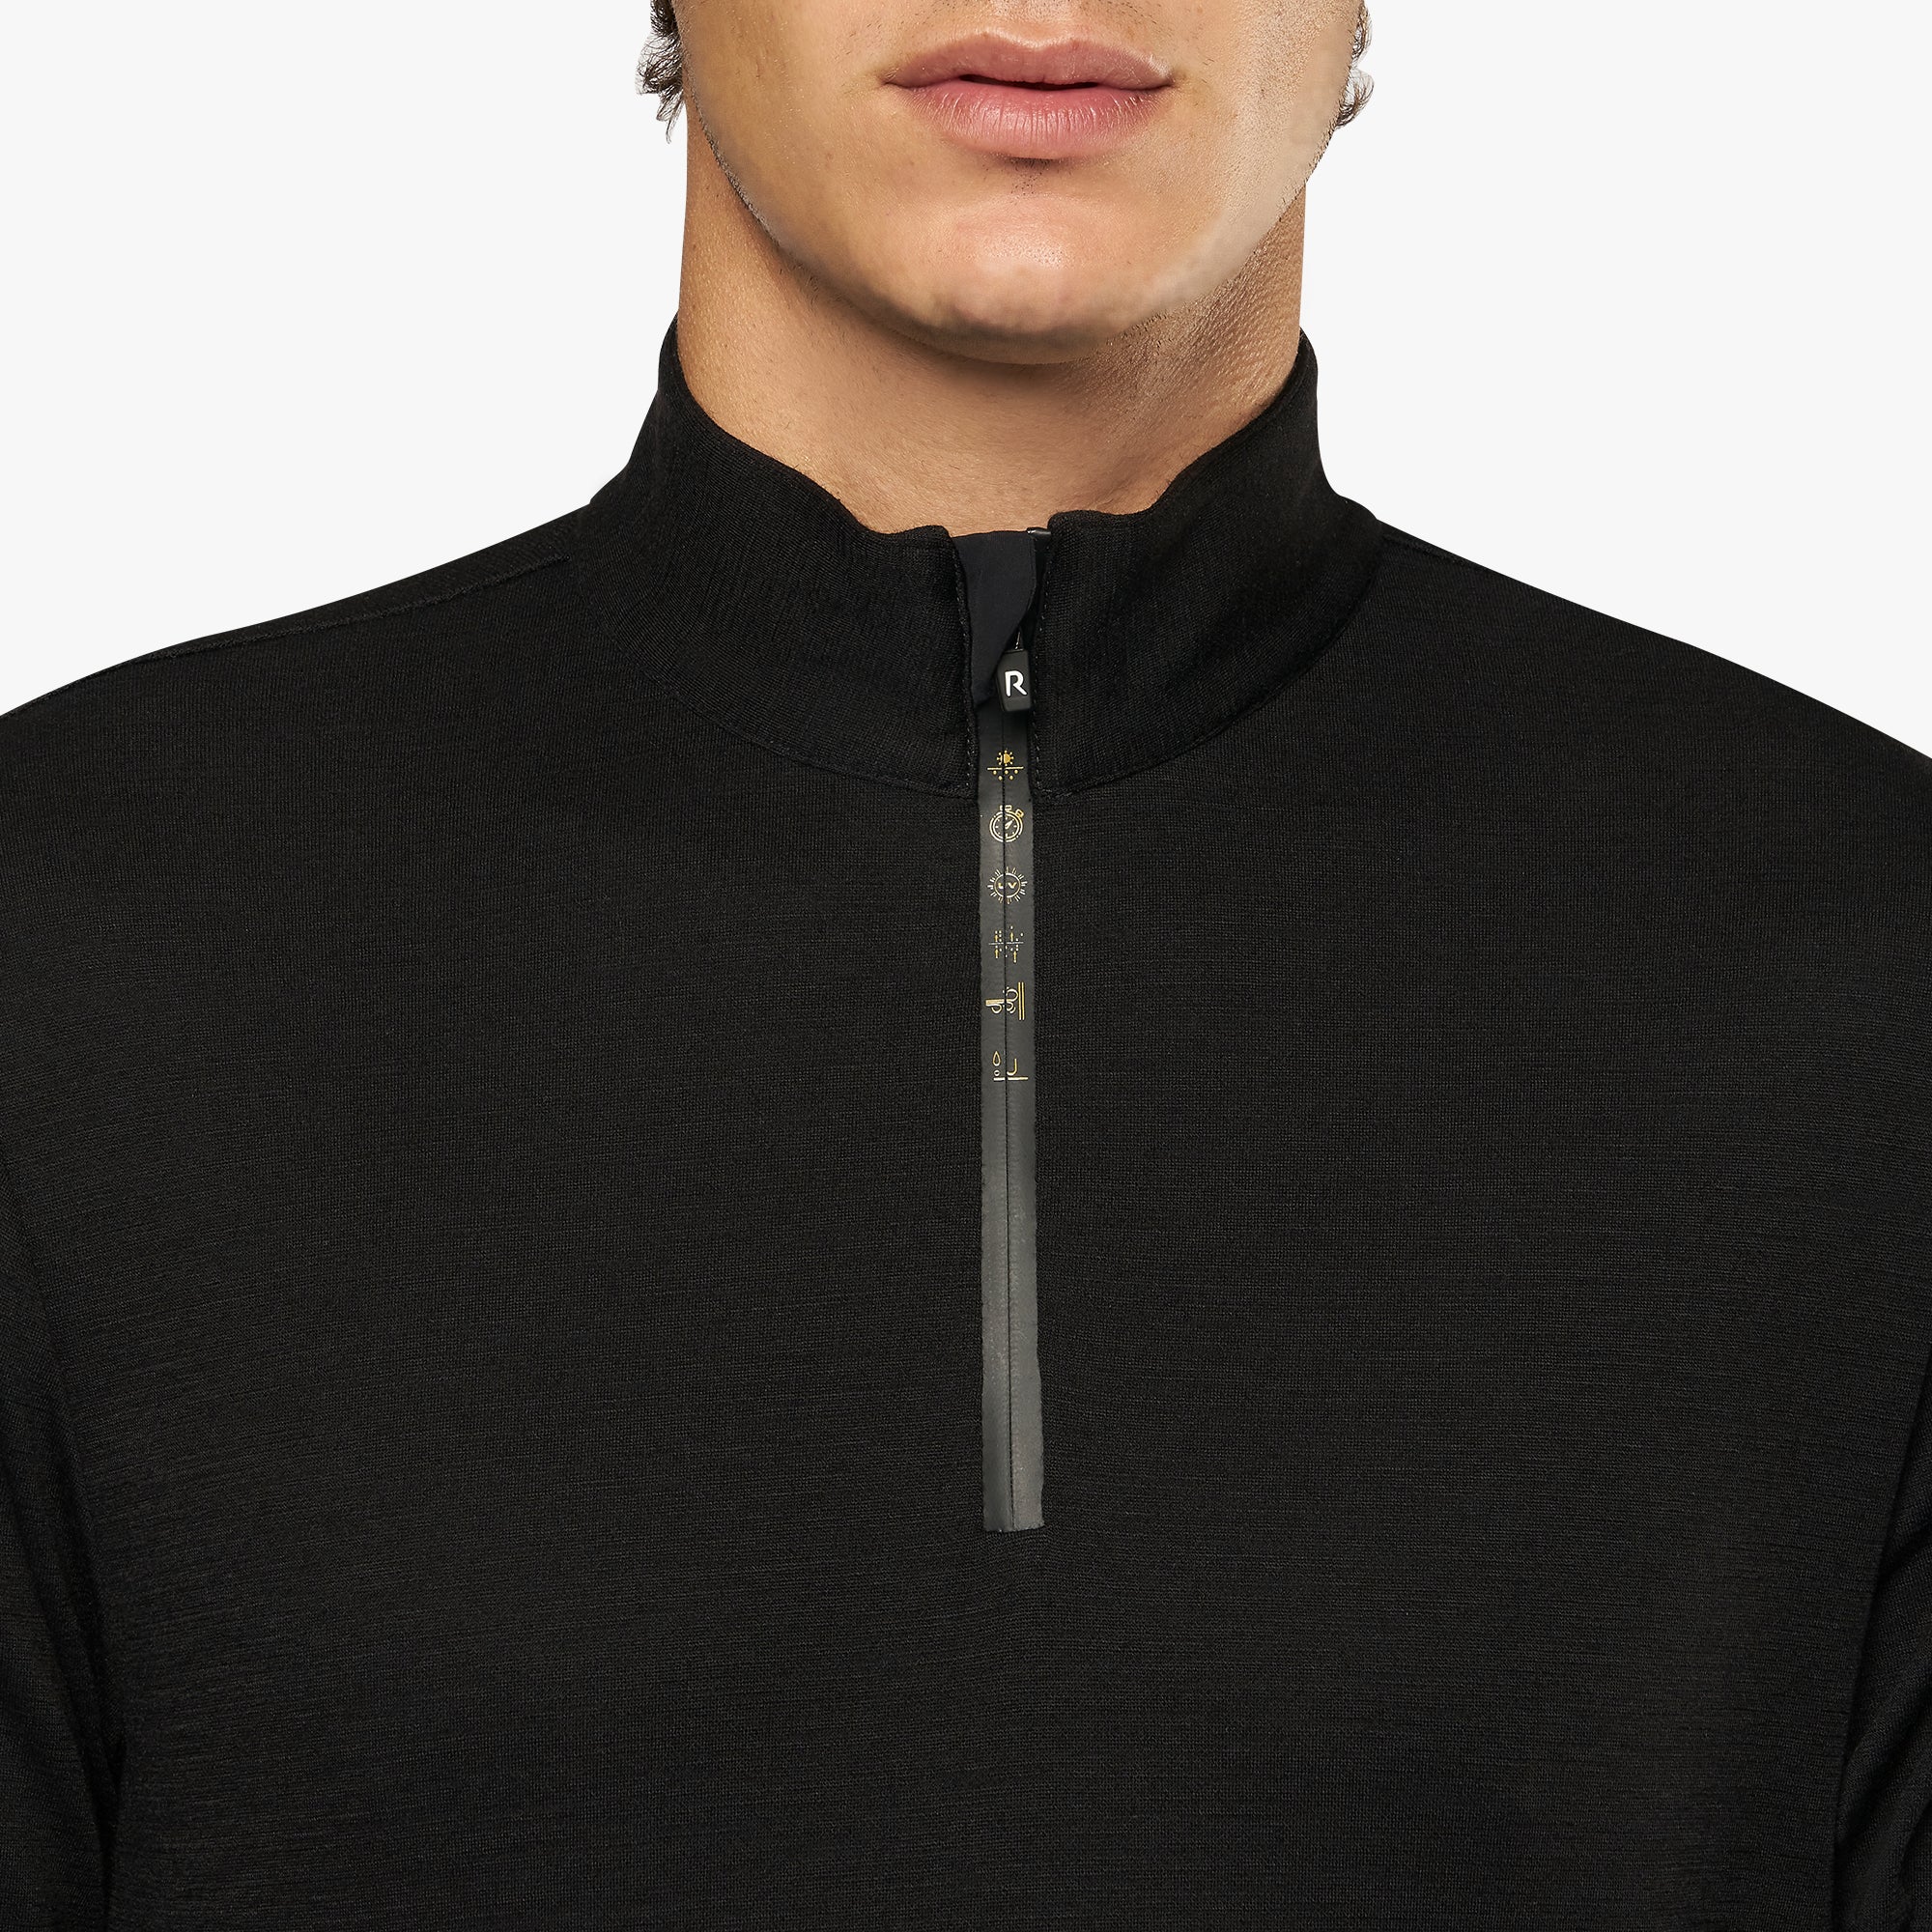 R-EVO LONG SLEEVES ZIP COMPETITION POLO SHIRT